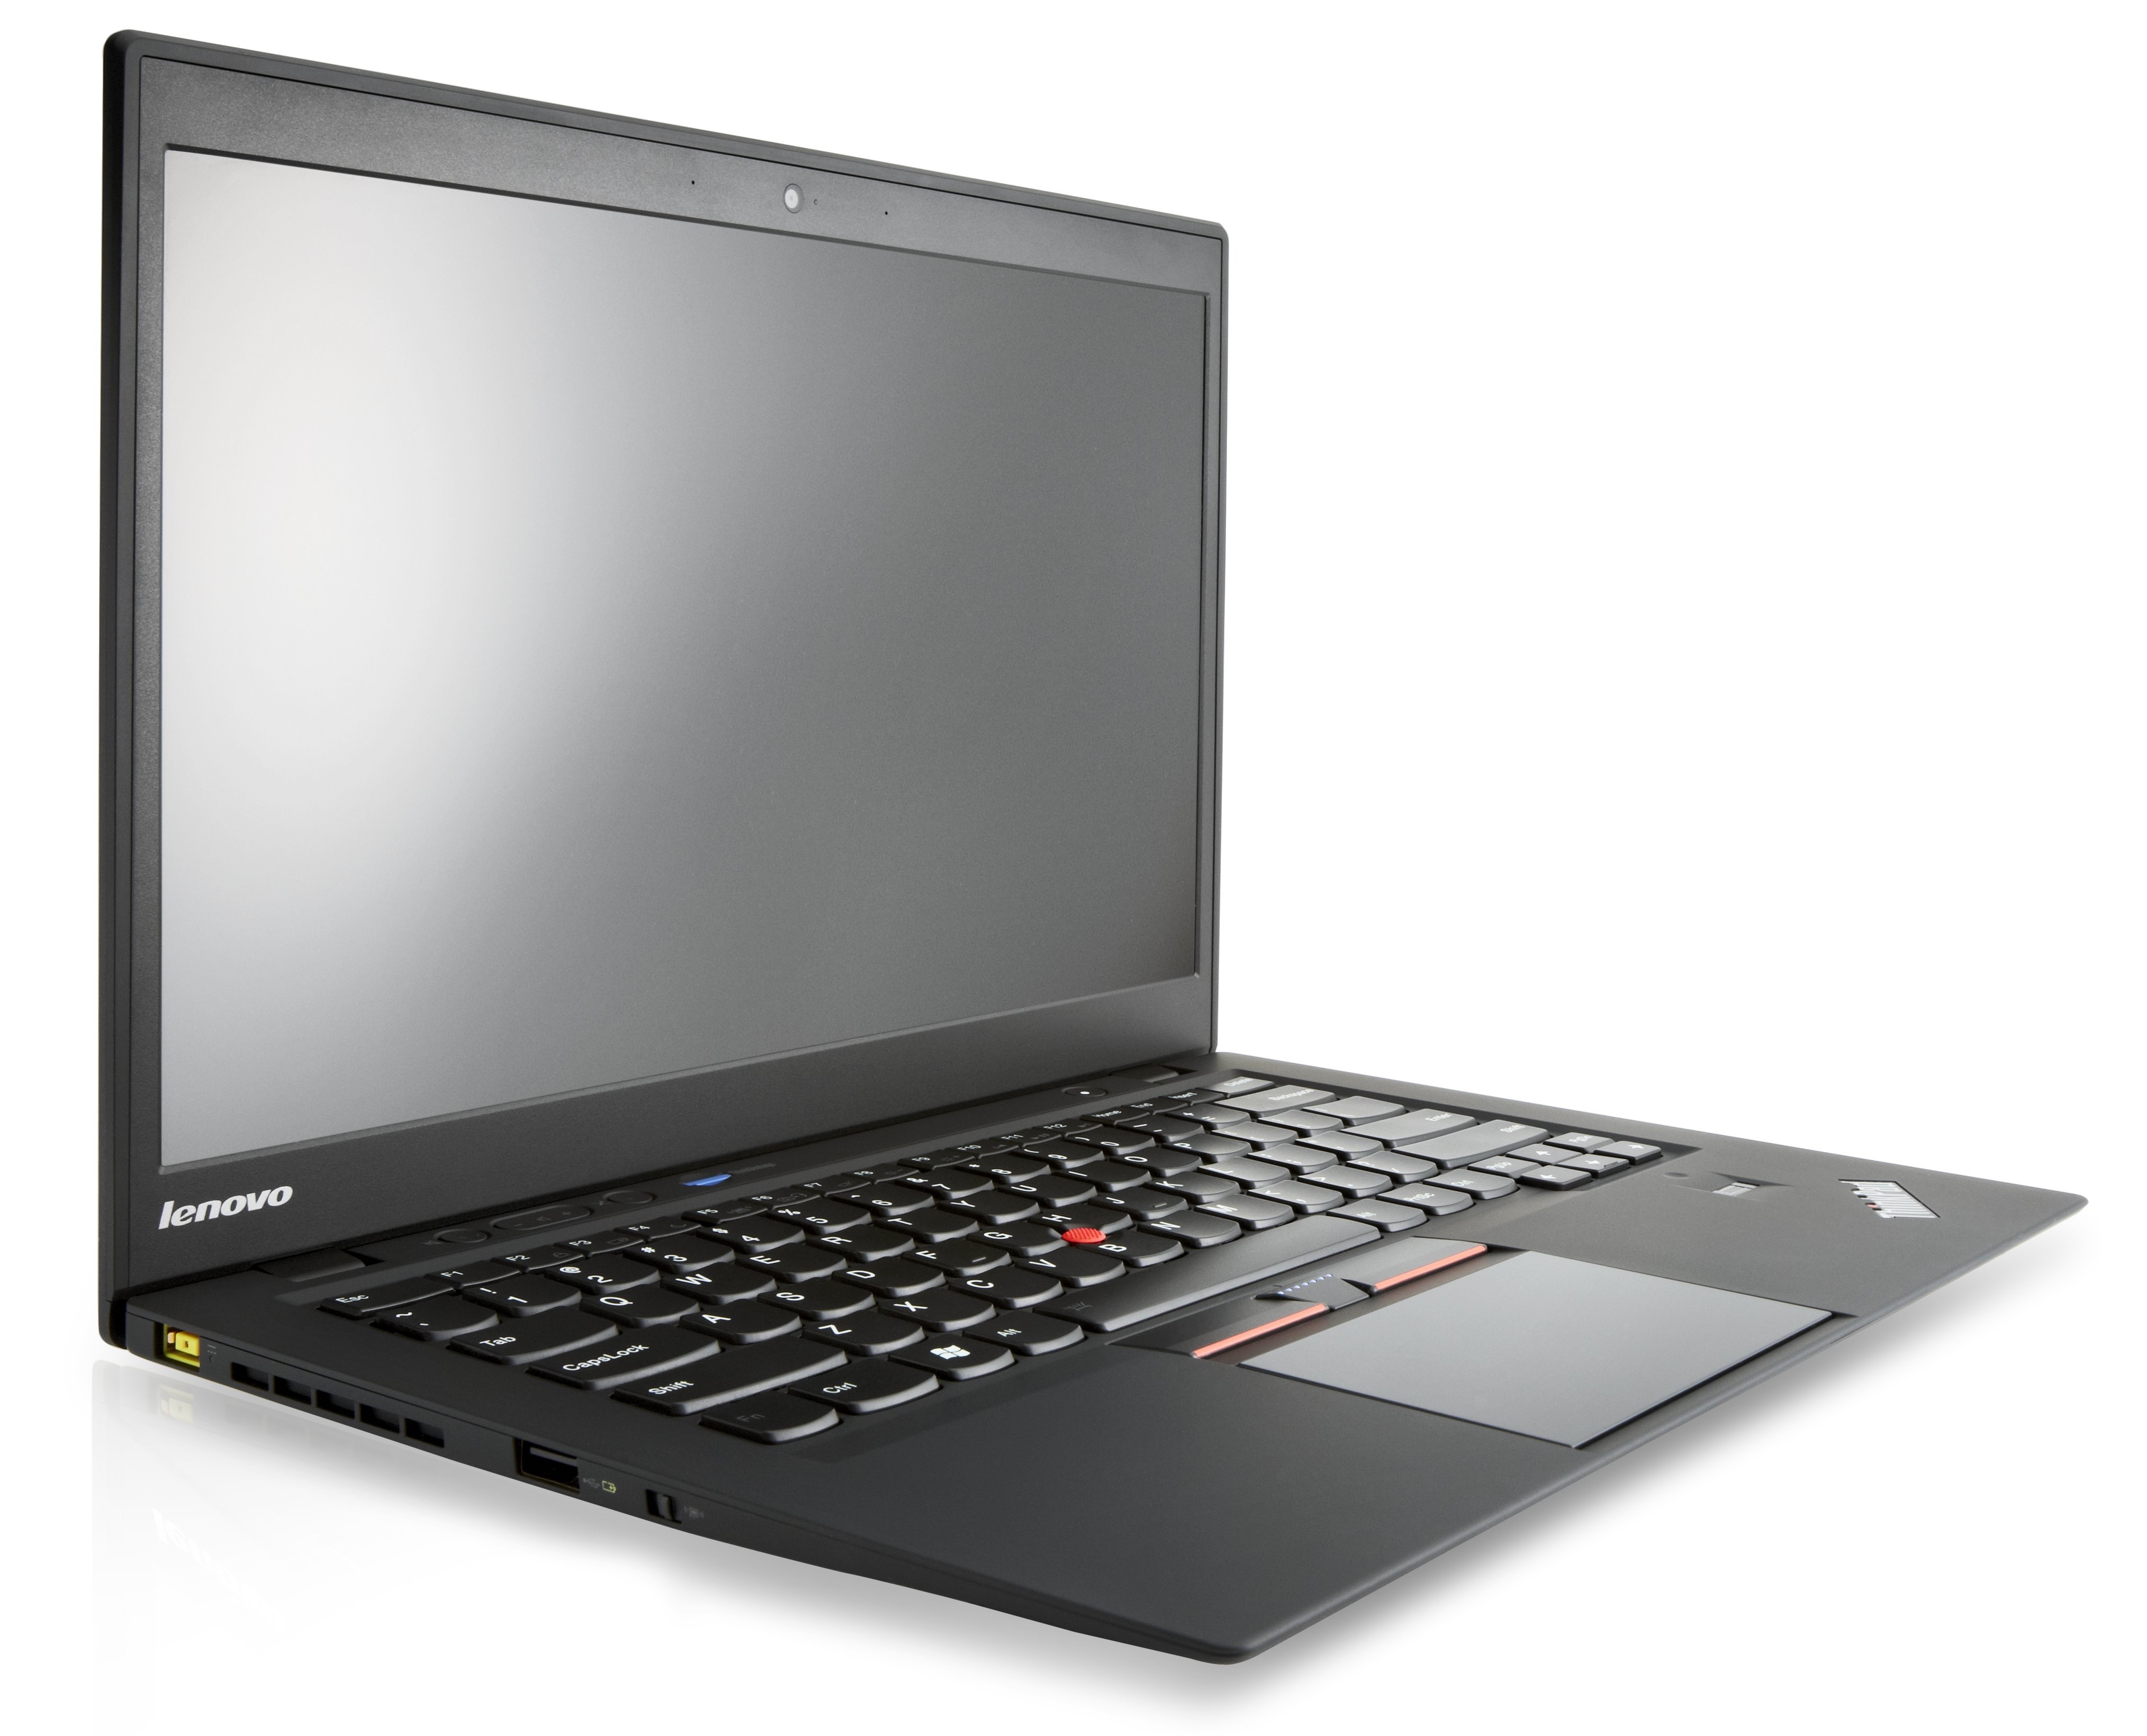 Lenovo ThinkPad X1 Carbon Ultrabook Review - NotebookCheck.net Reviews